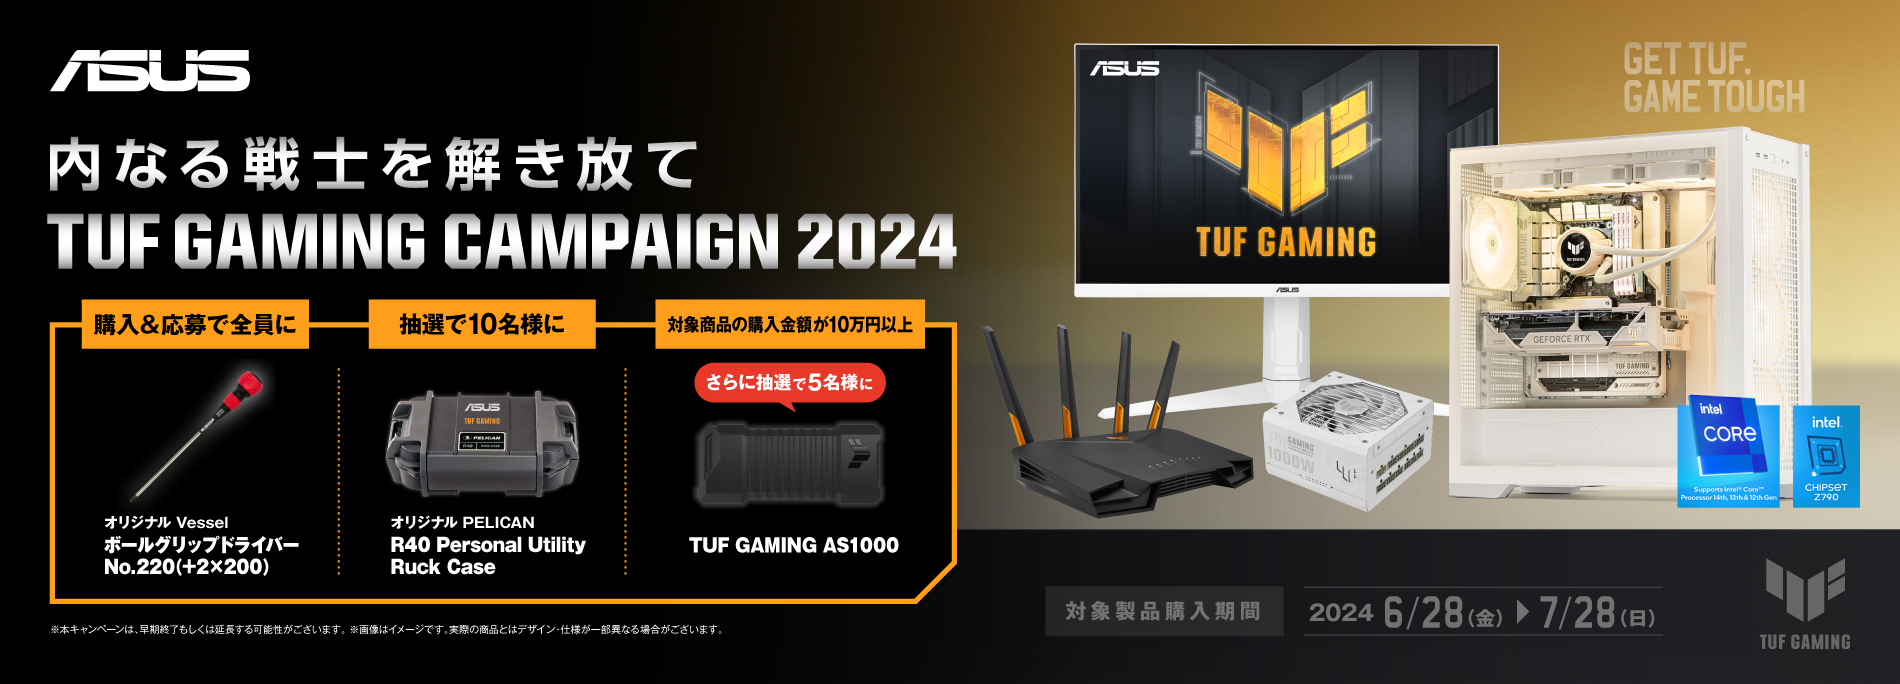 TUF GAMING CAMPAIGN 2024